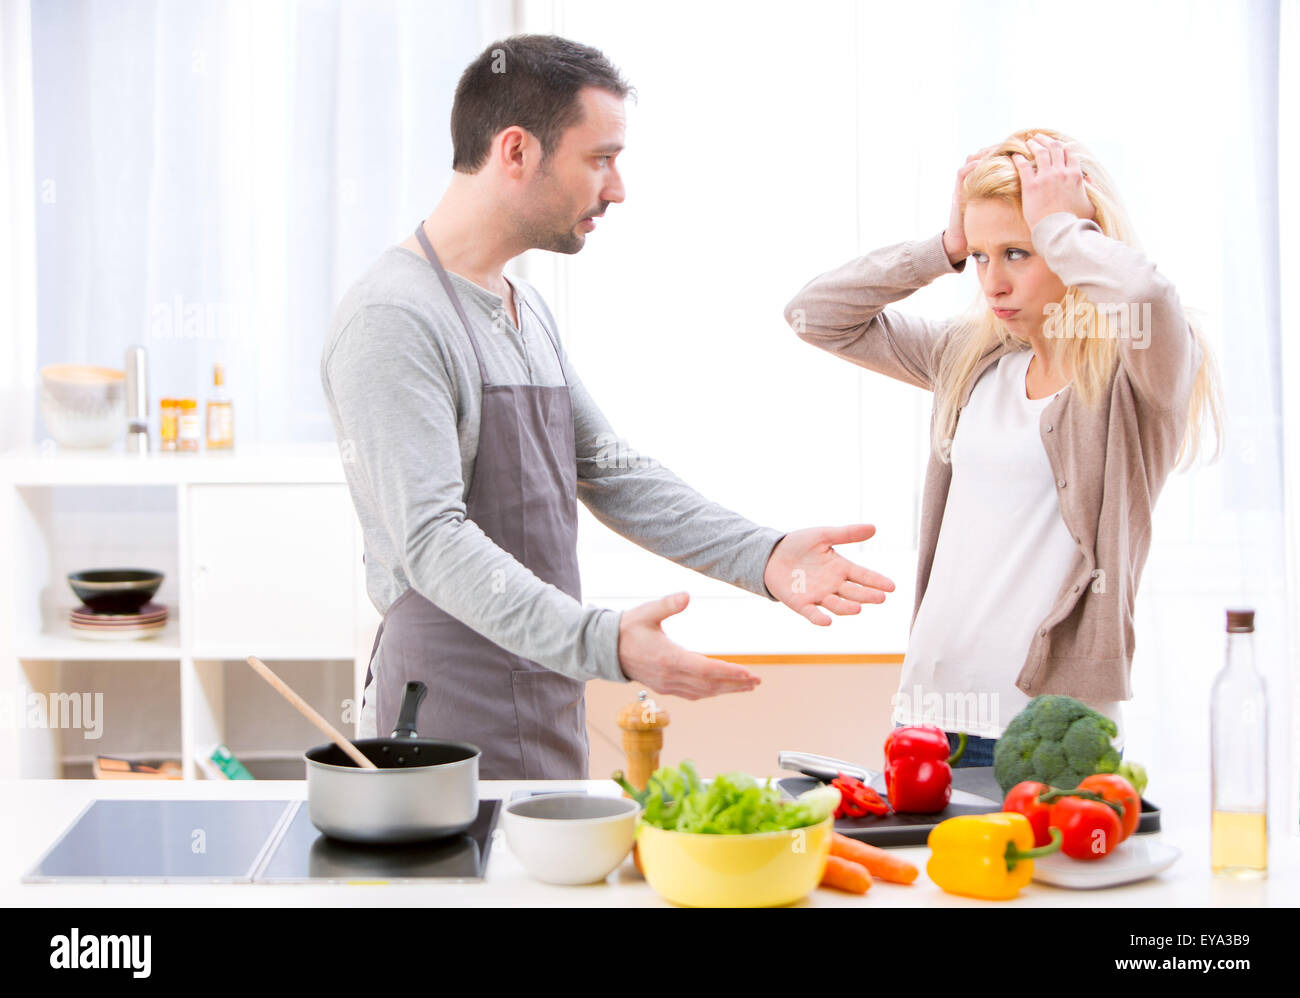 View of a Young attractive couple having an argue while cooking Stock Photo